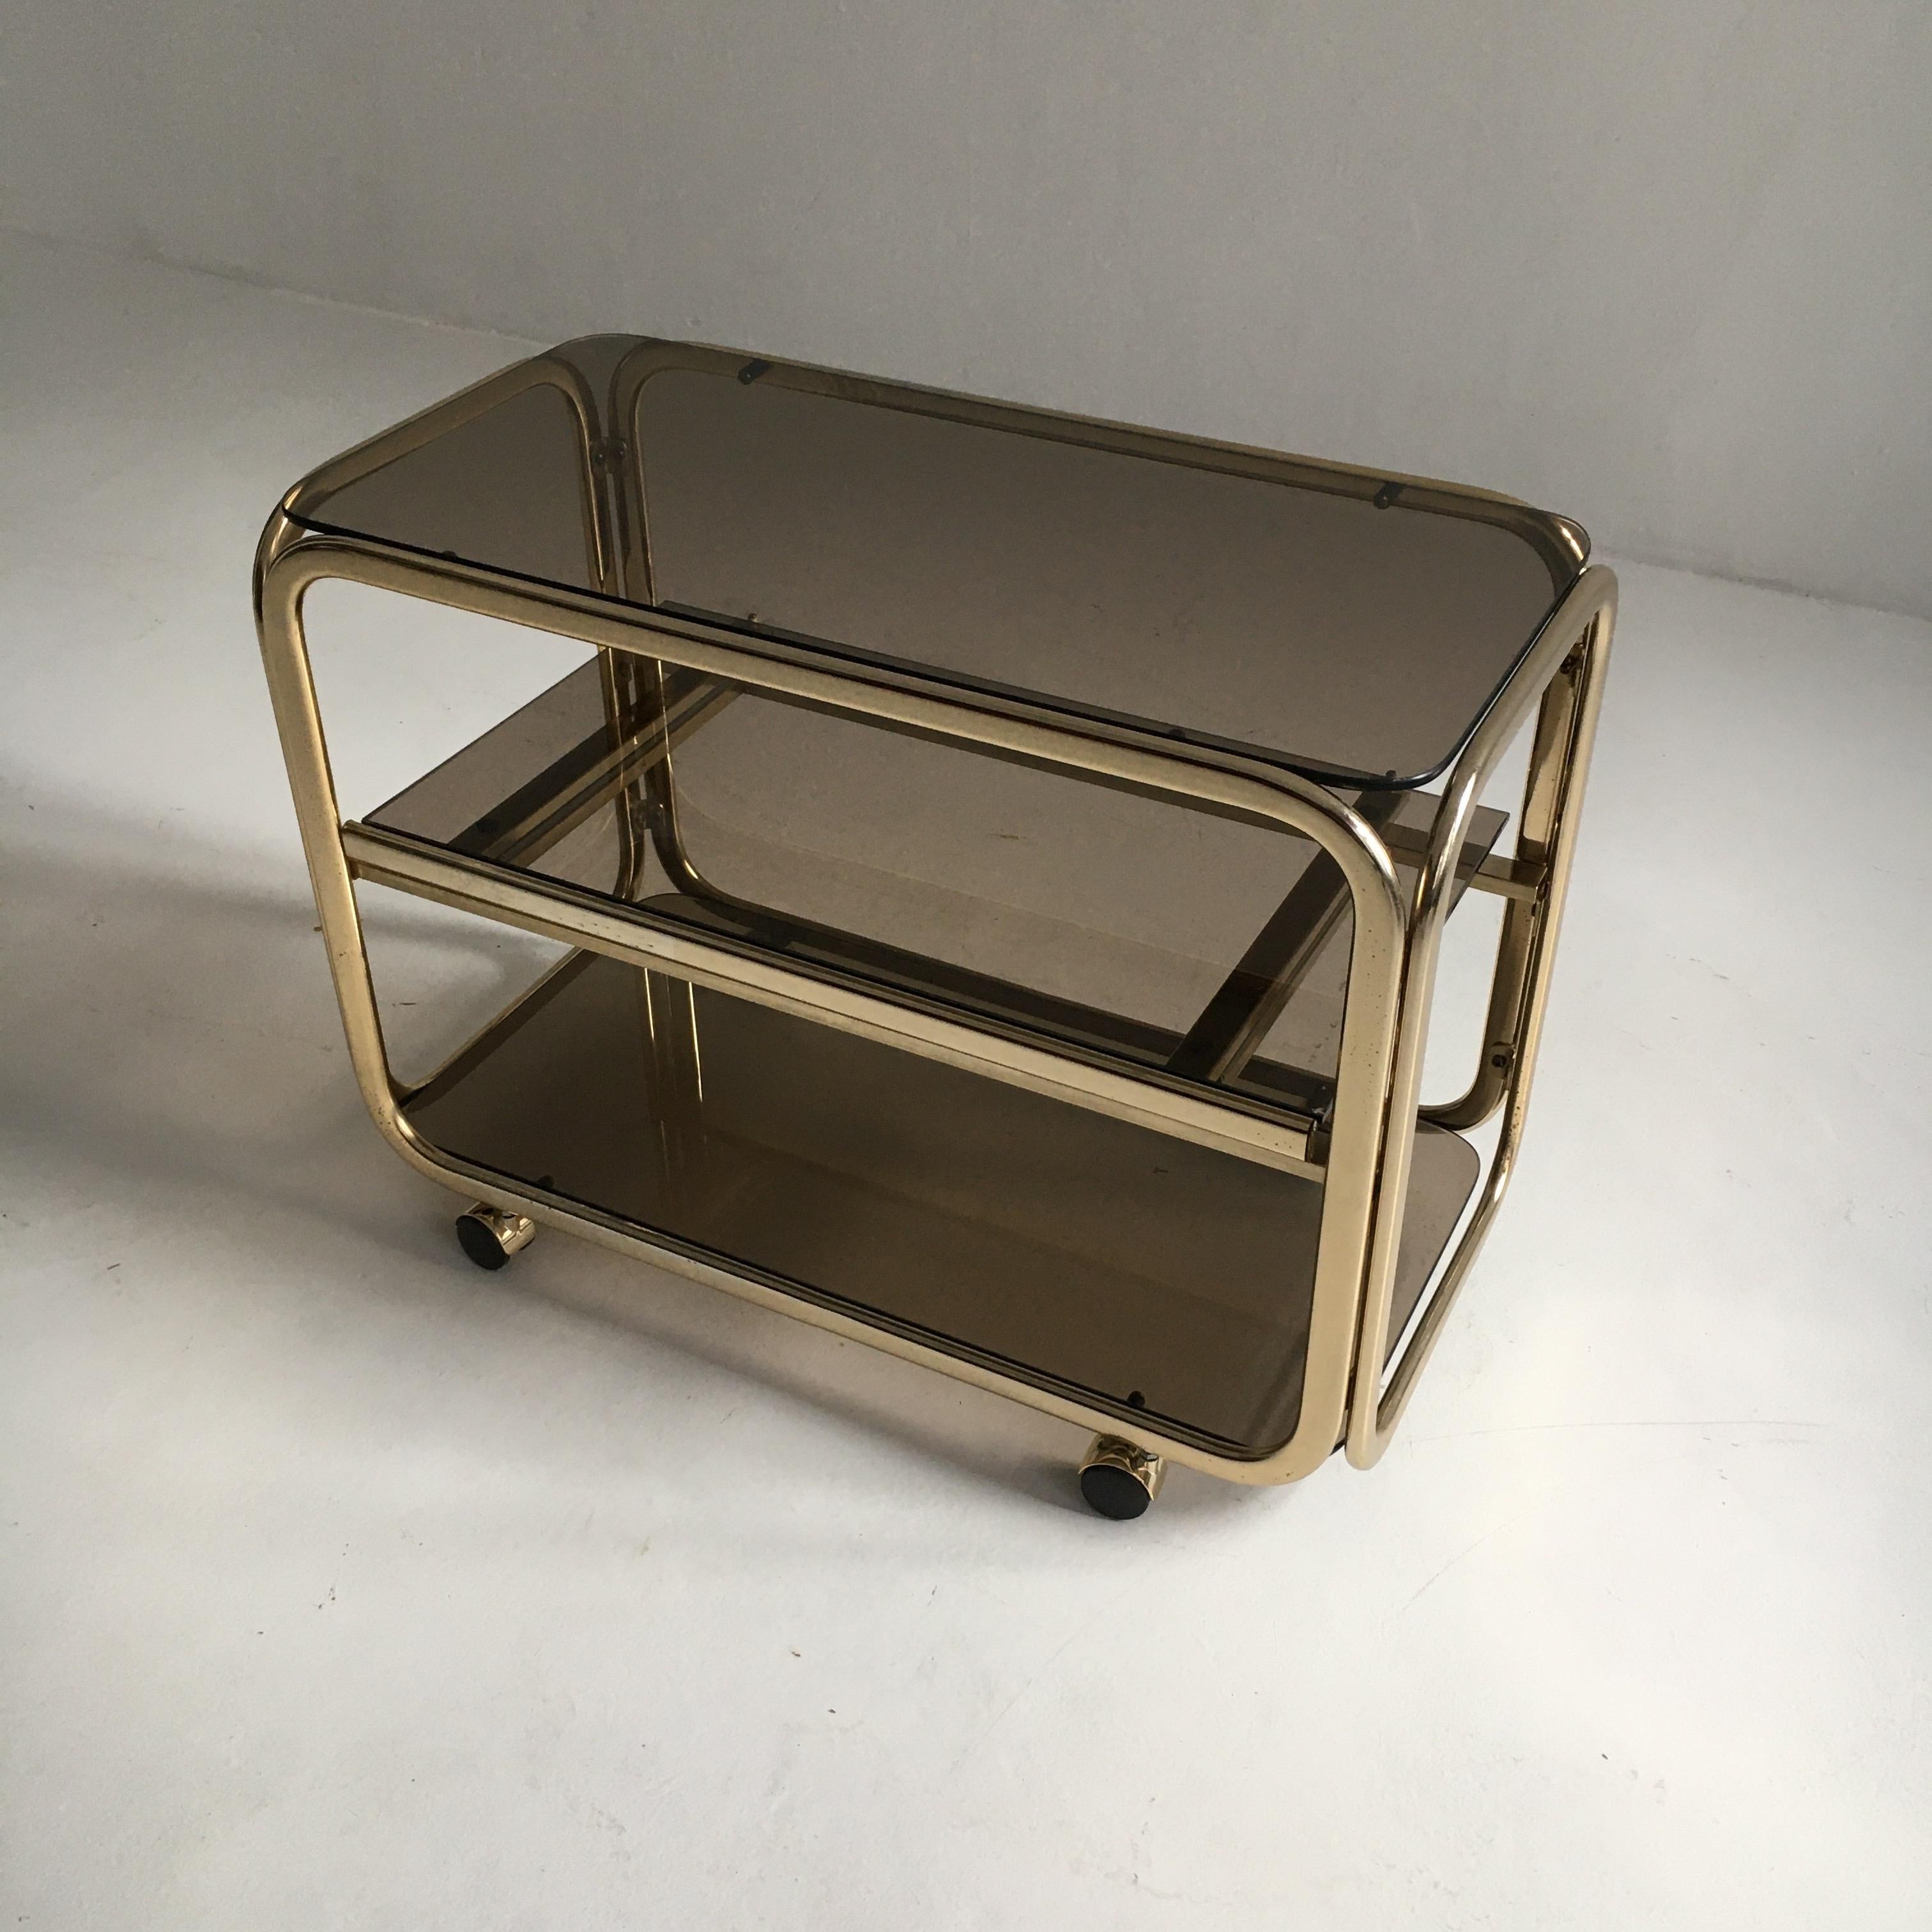 Vintage Brass-Plated Bar Cart Table Brown Smoked Glass Plates by Morex, 1970s 1